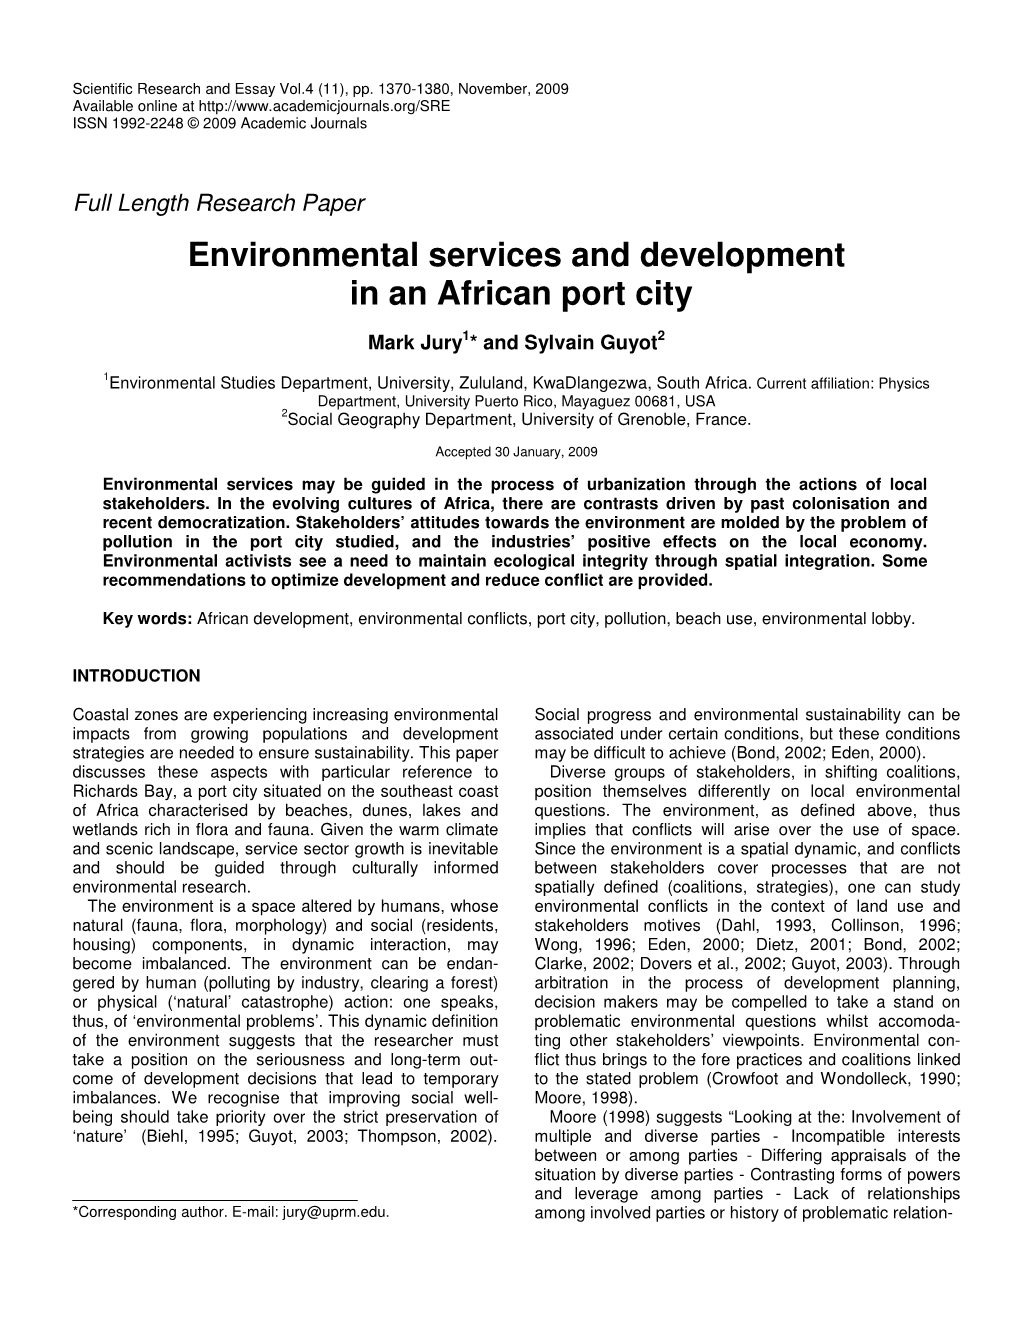 Environmental Services and Development in an African Port City